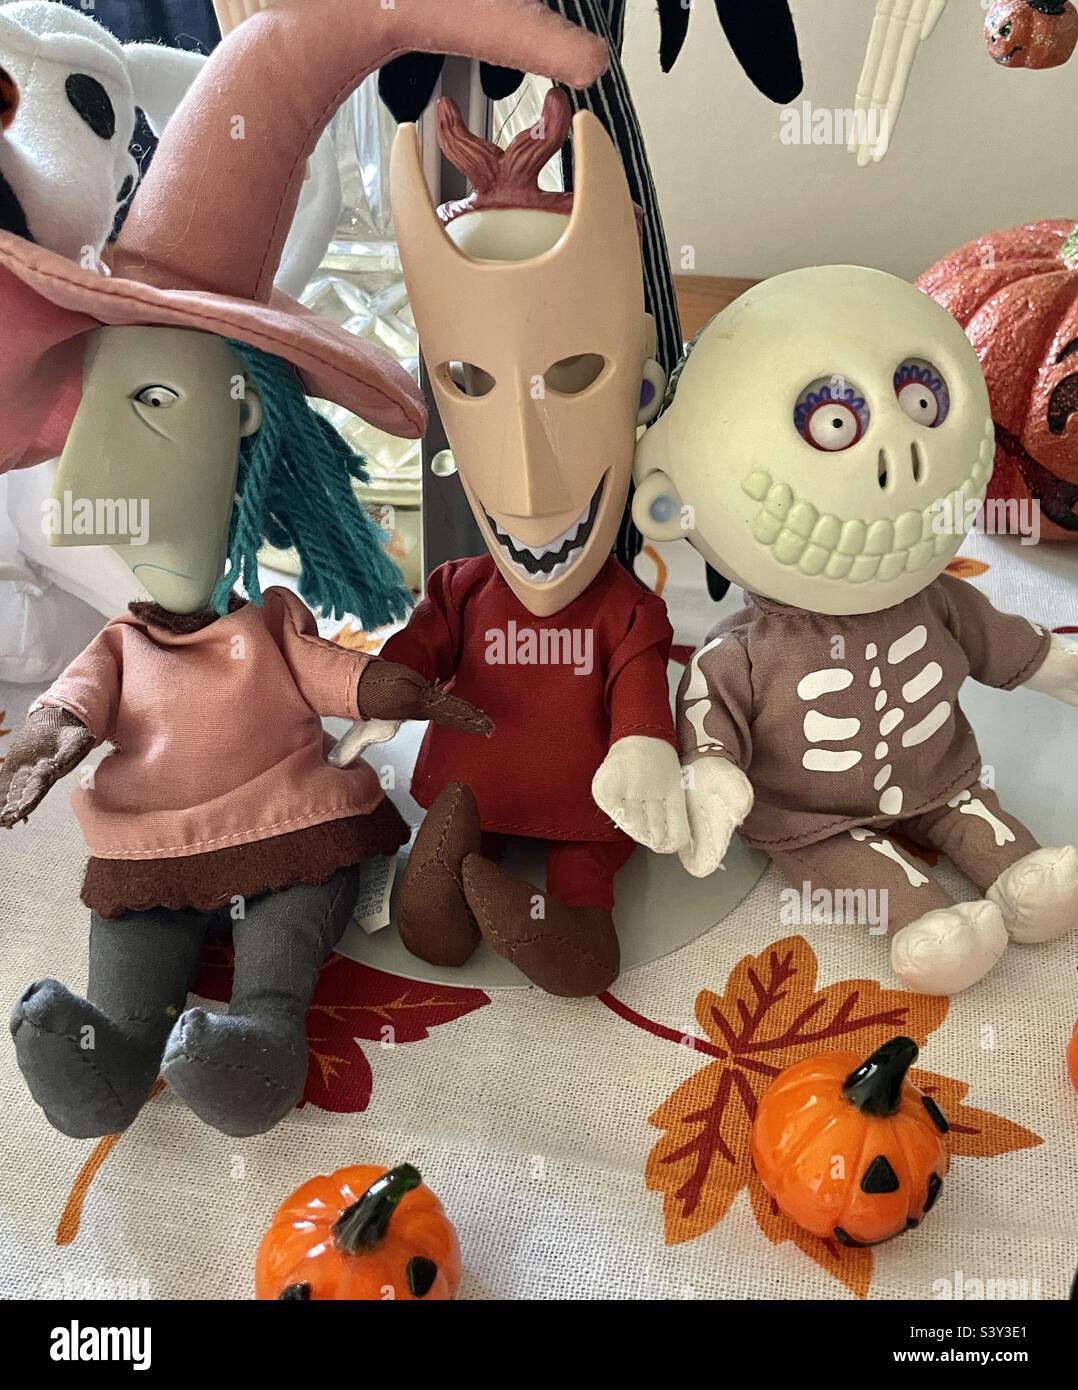 Nightmare Before Christmas dolls and figurines set upon an end table serve as Halloween decorations each year in a Utah, USA home. Stock Photo